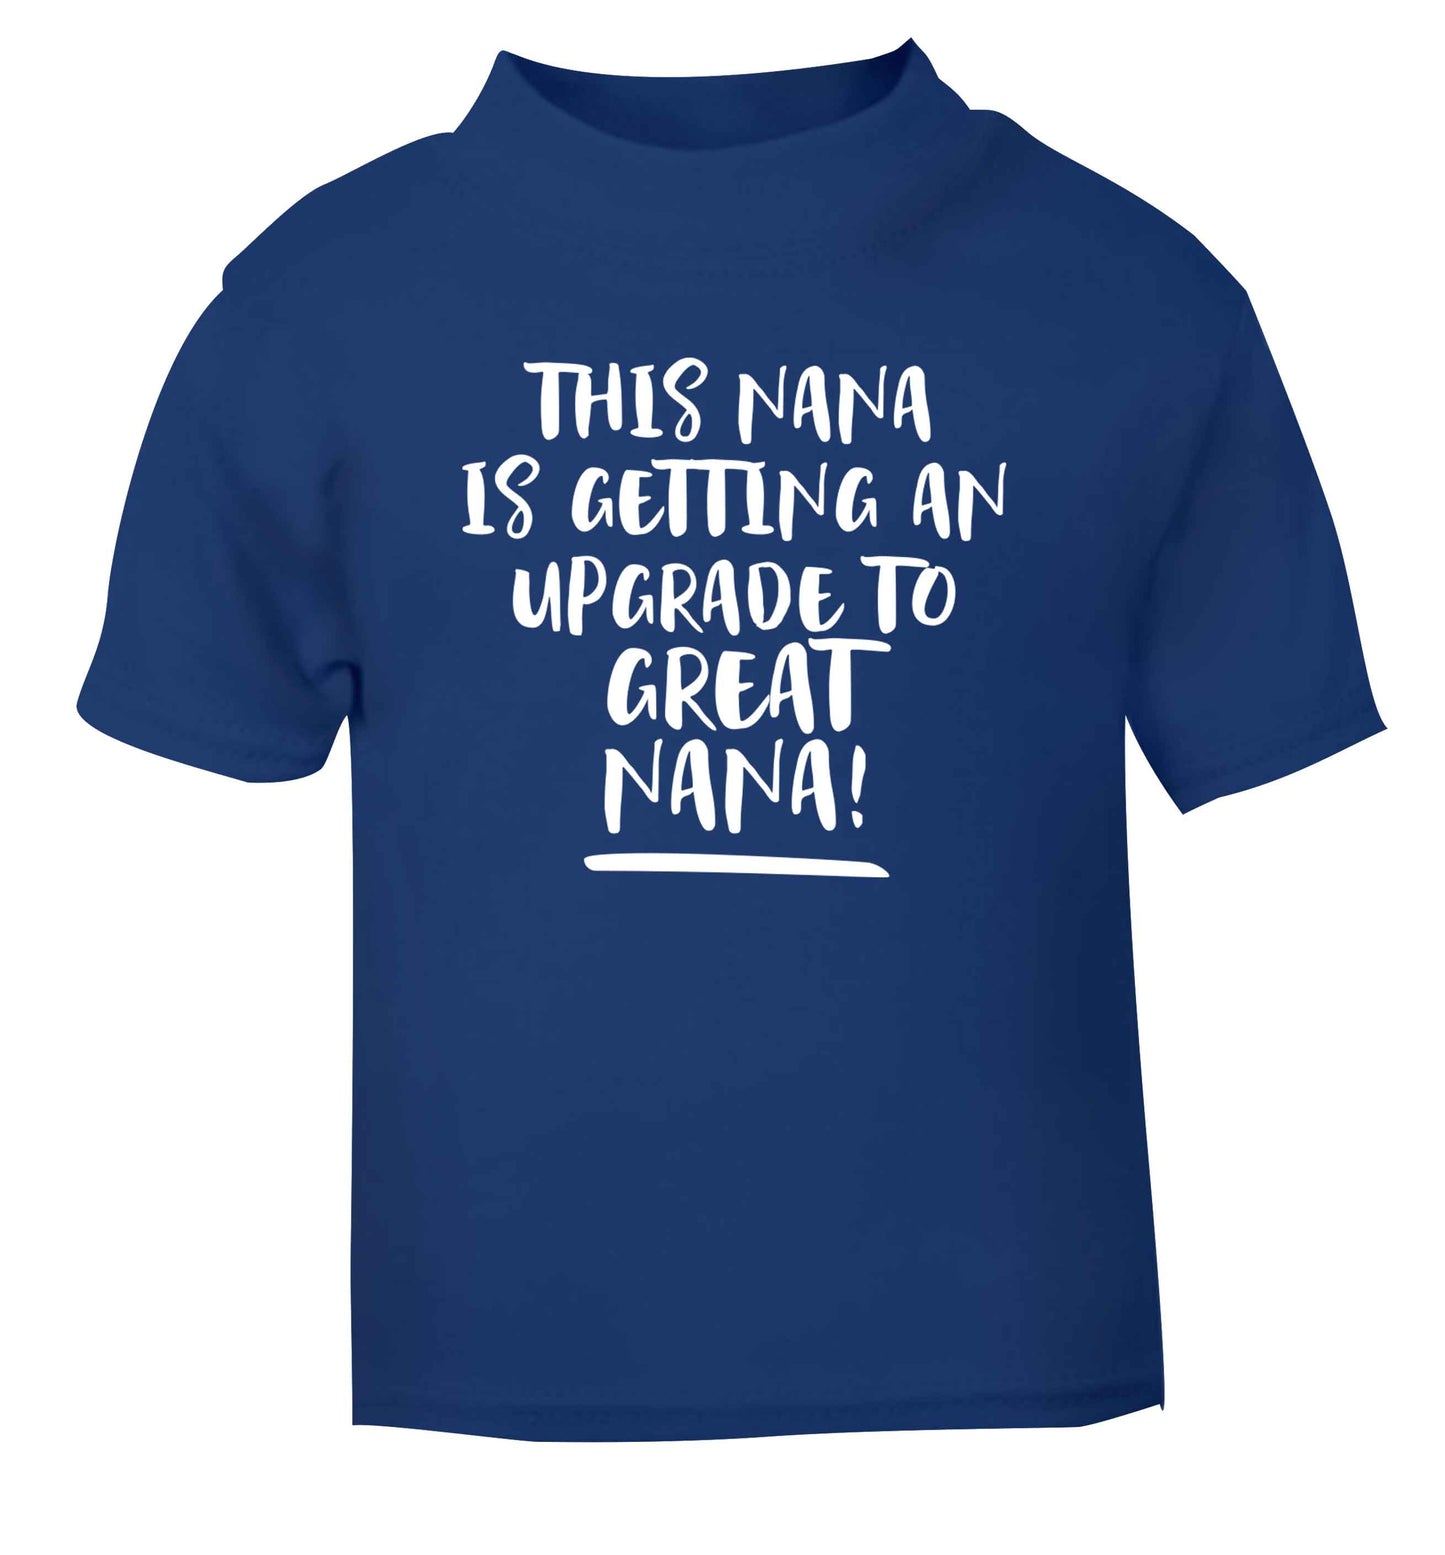 This nana is getting an upgrade to great nana! blue Baby Toddler Tshirt 2 Years